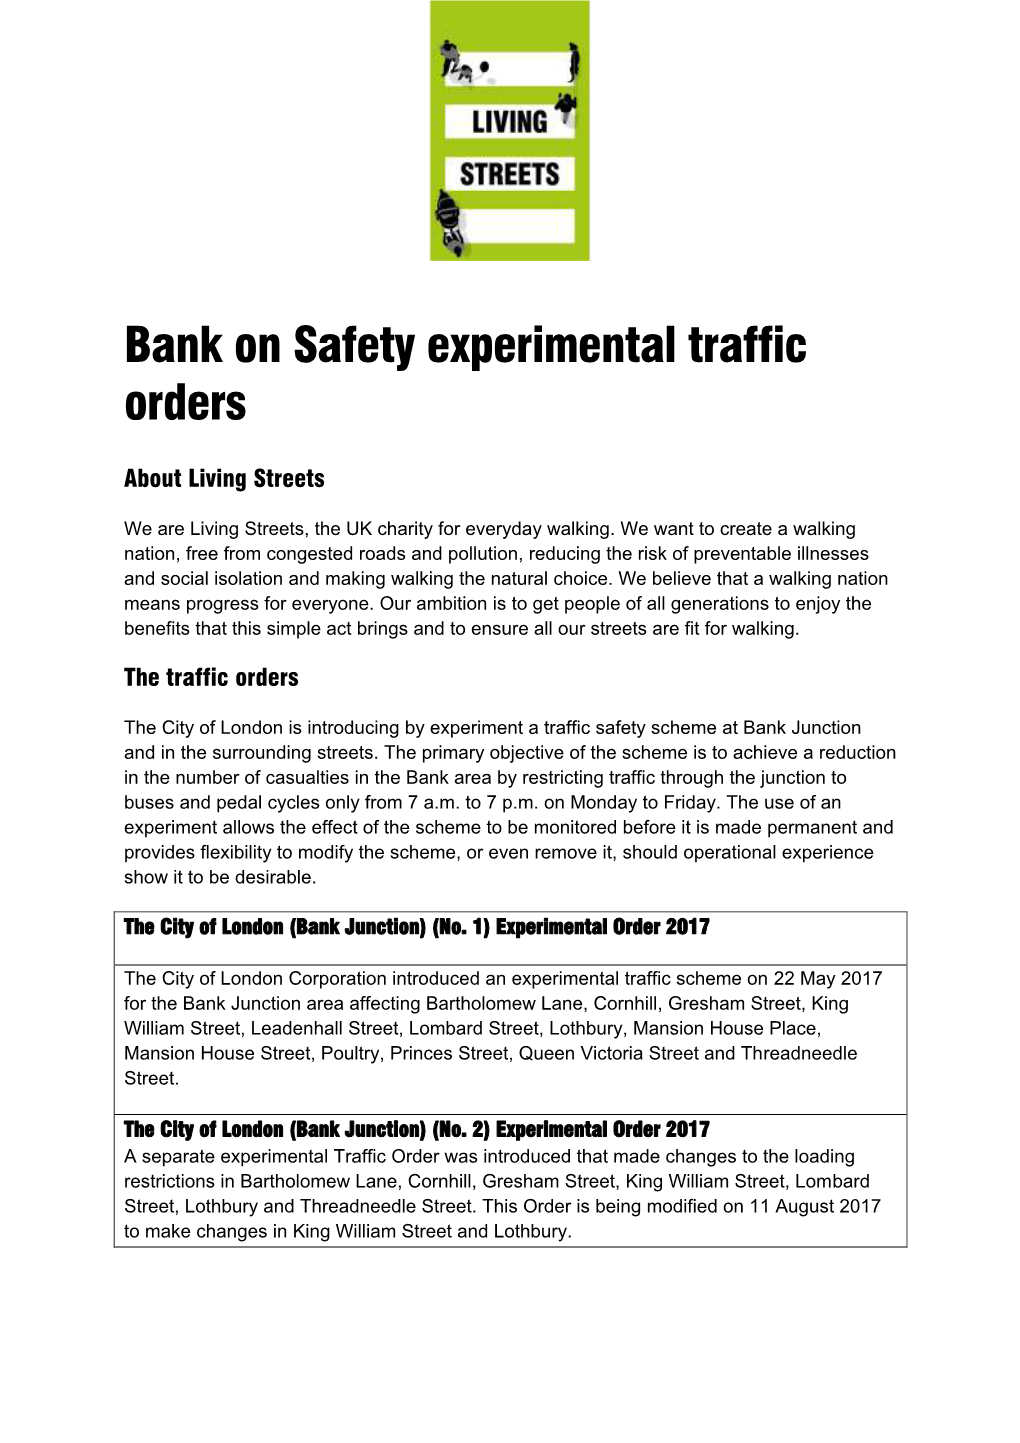 Bank on Safety Experimental Traffic Orders